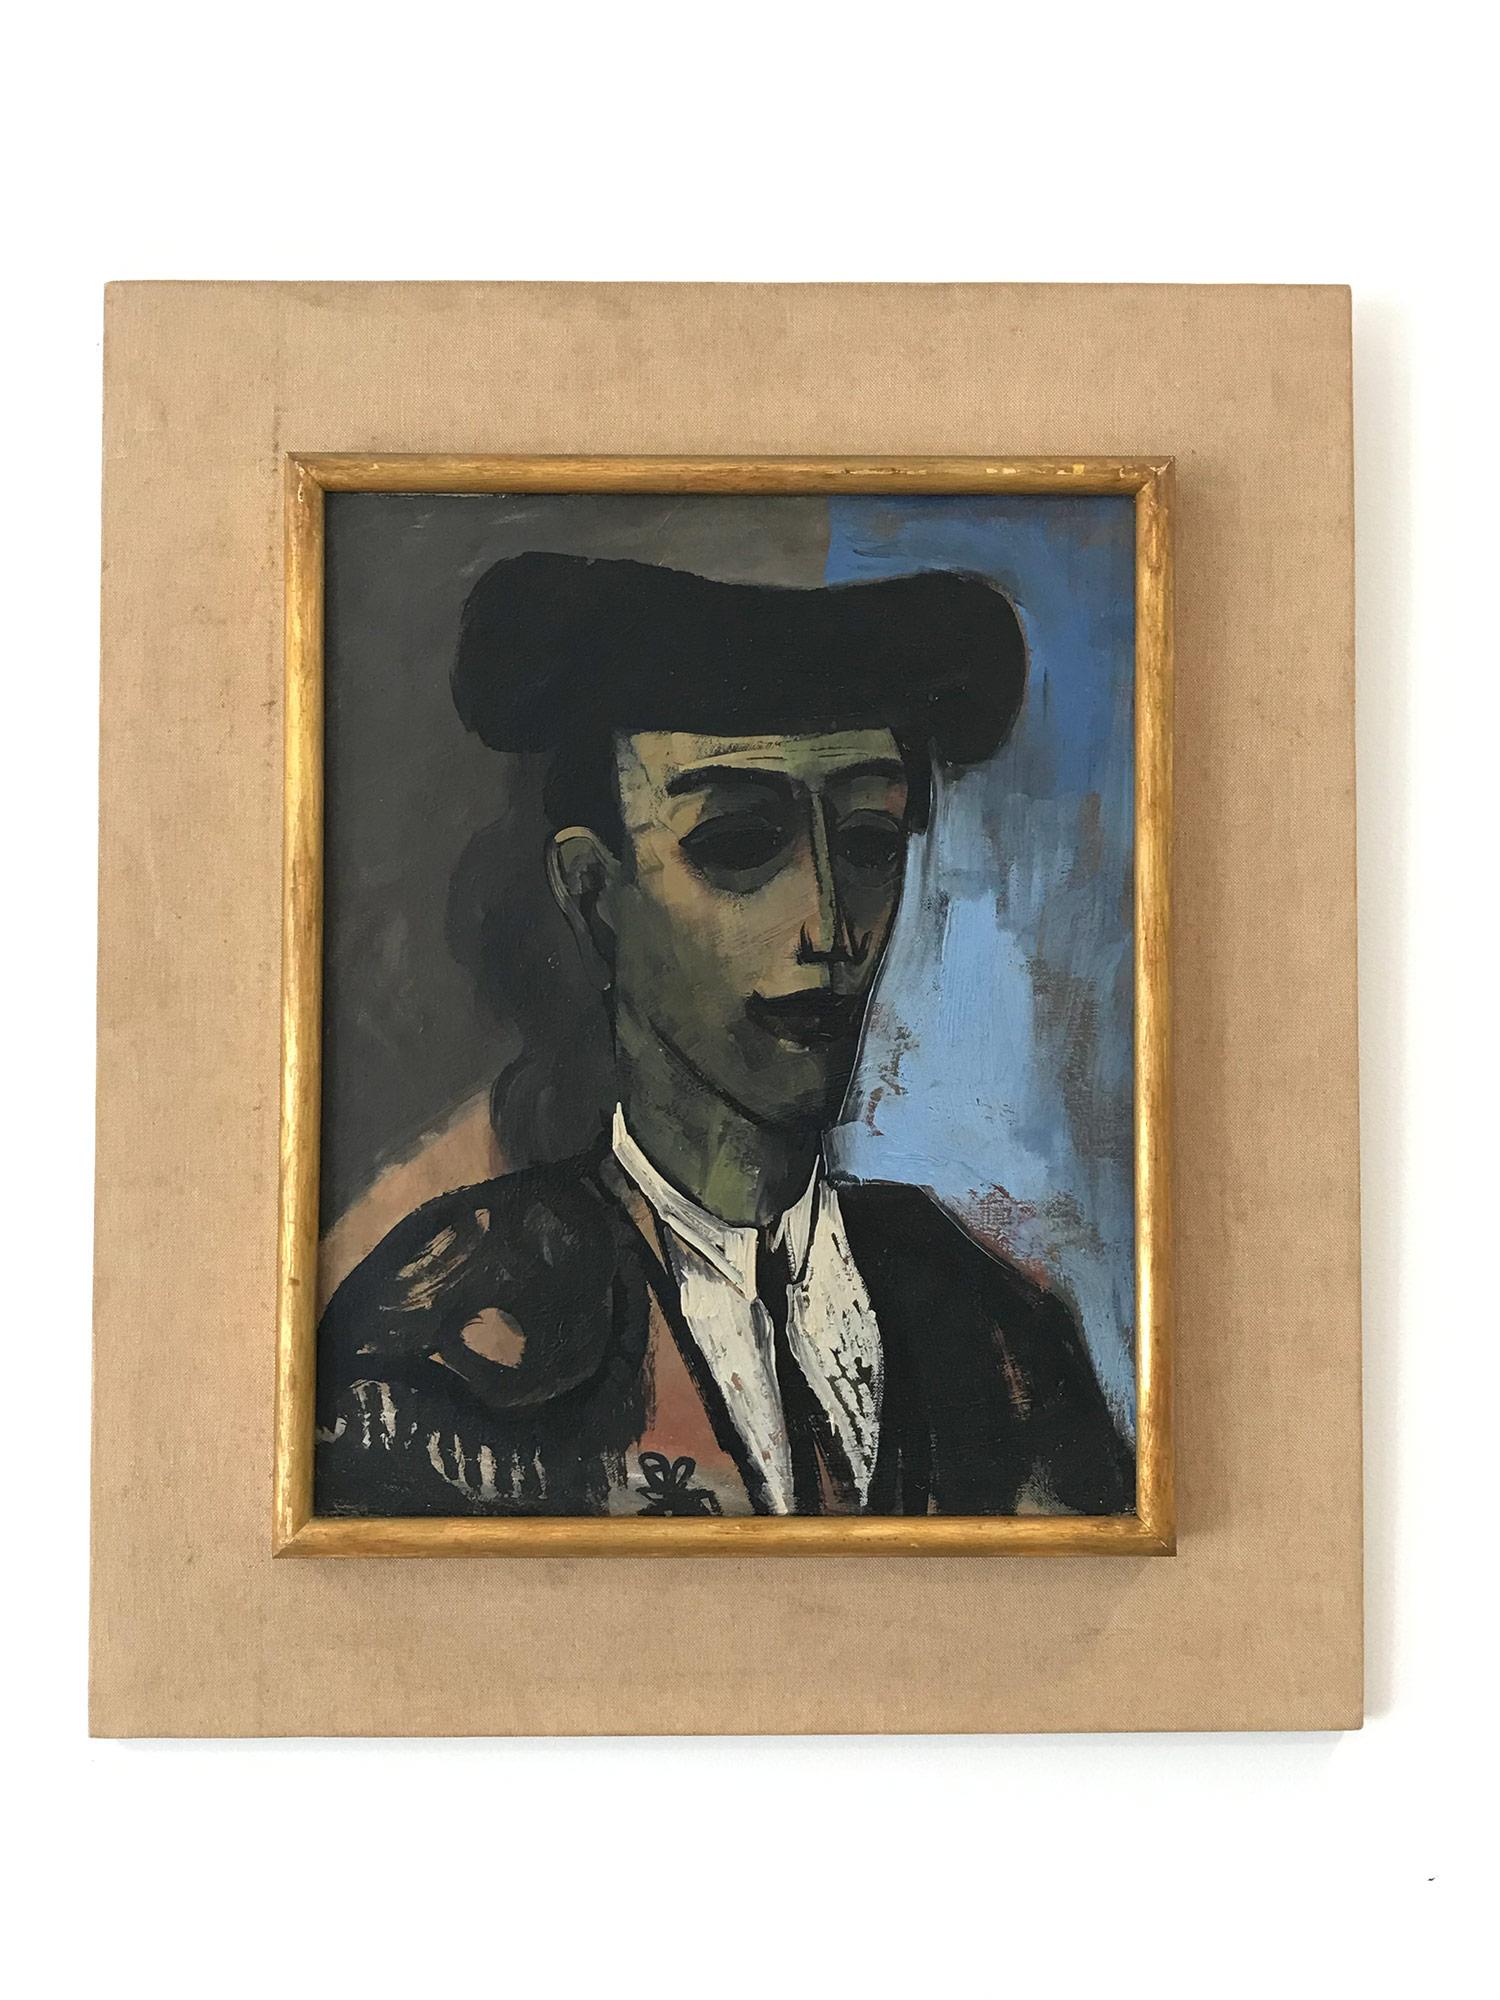 This painting depicts a striking portrait of a young Matador with dark hair against a blue background. The colors and quick brush strokes are what make this painting so distinctive and strong and we are somehow reminded of the work by Bernard